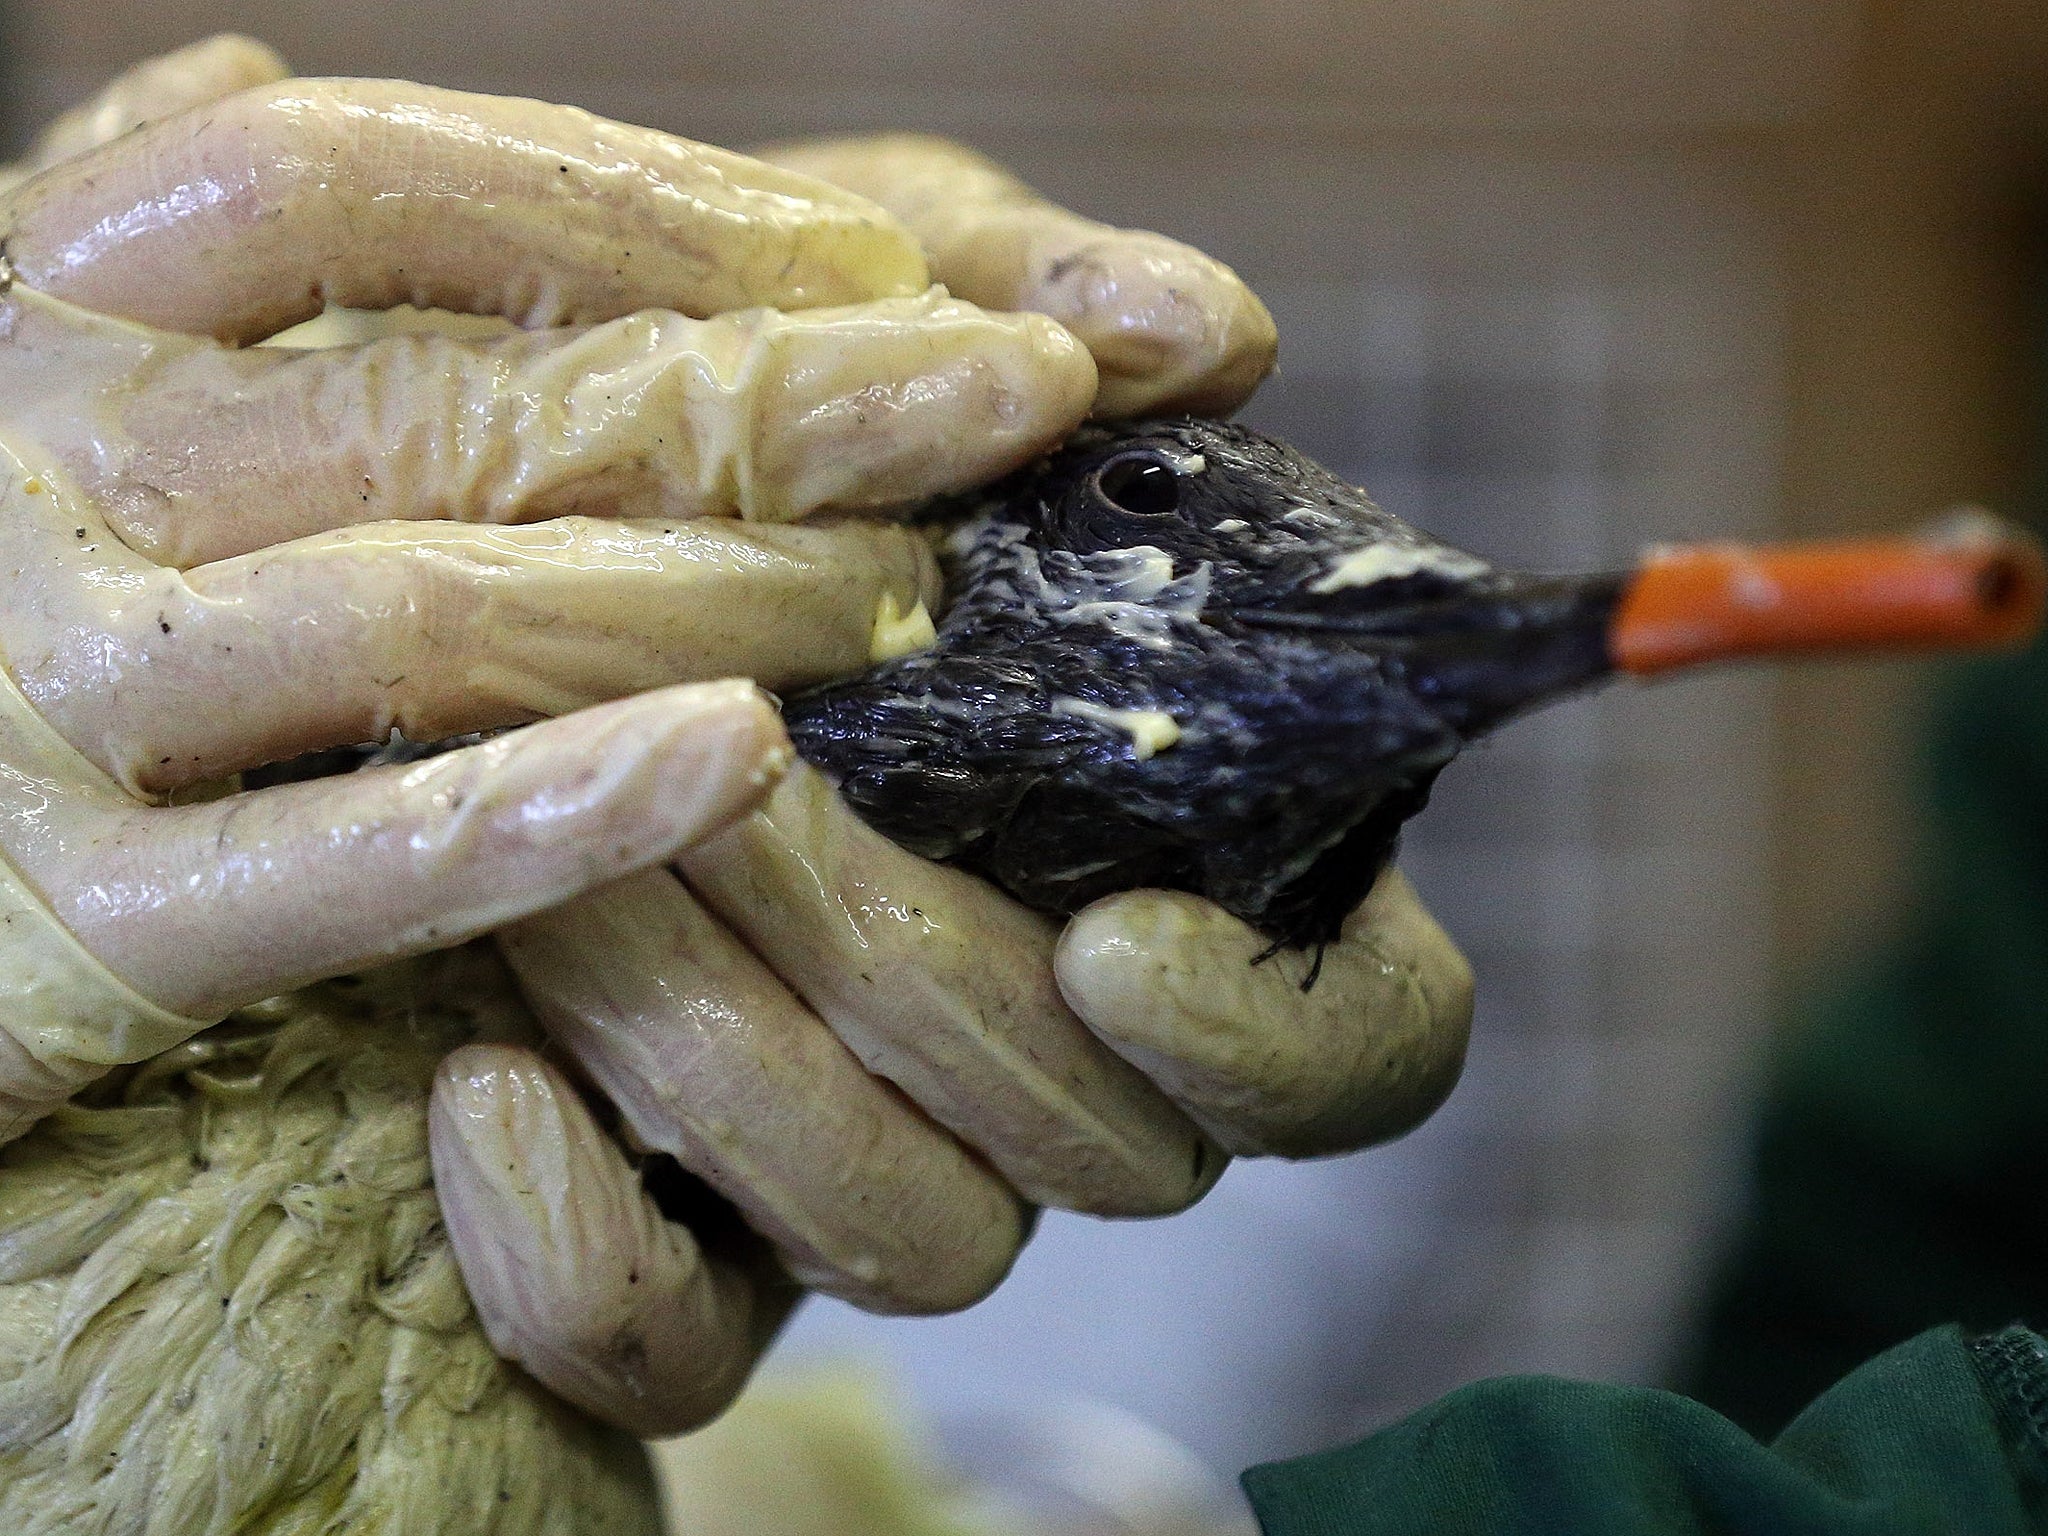 Staff at the RSPCA West Hatch Wildlife Centre rub margarine into the feathers to help clean a stricken guillemot covered in pollutant near Taunton